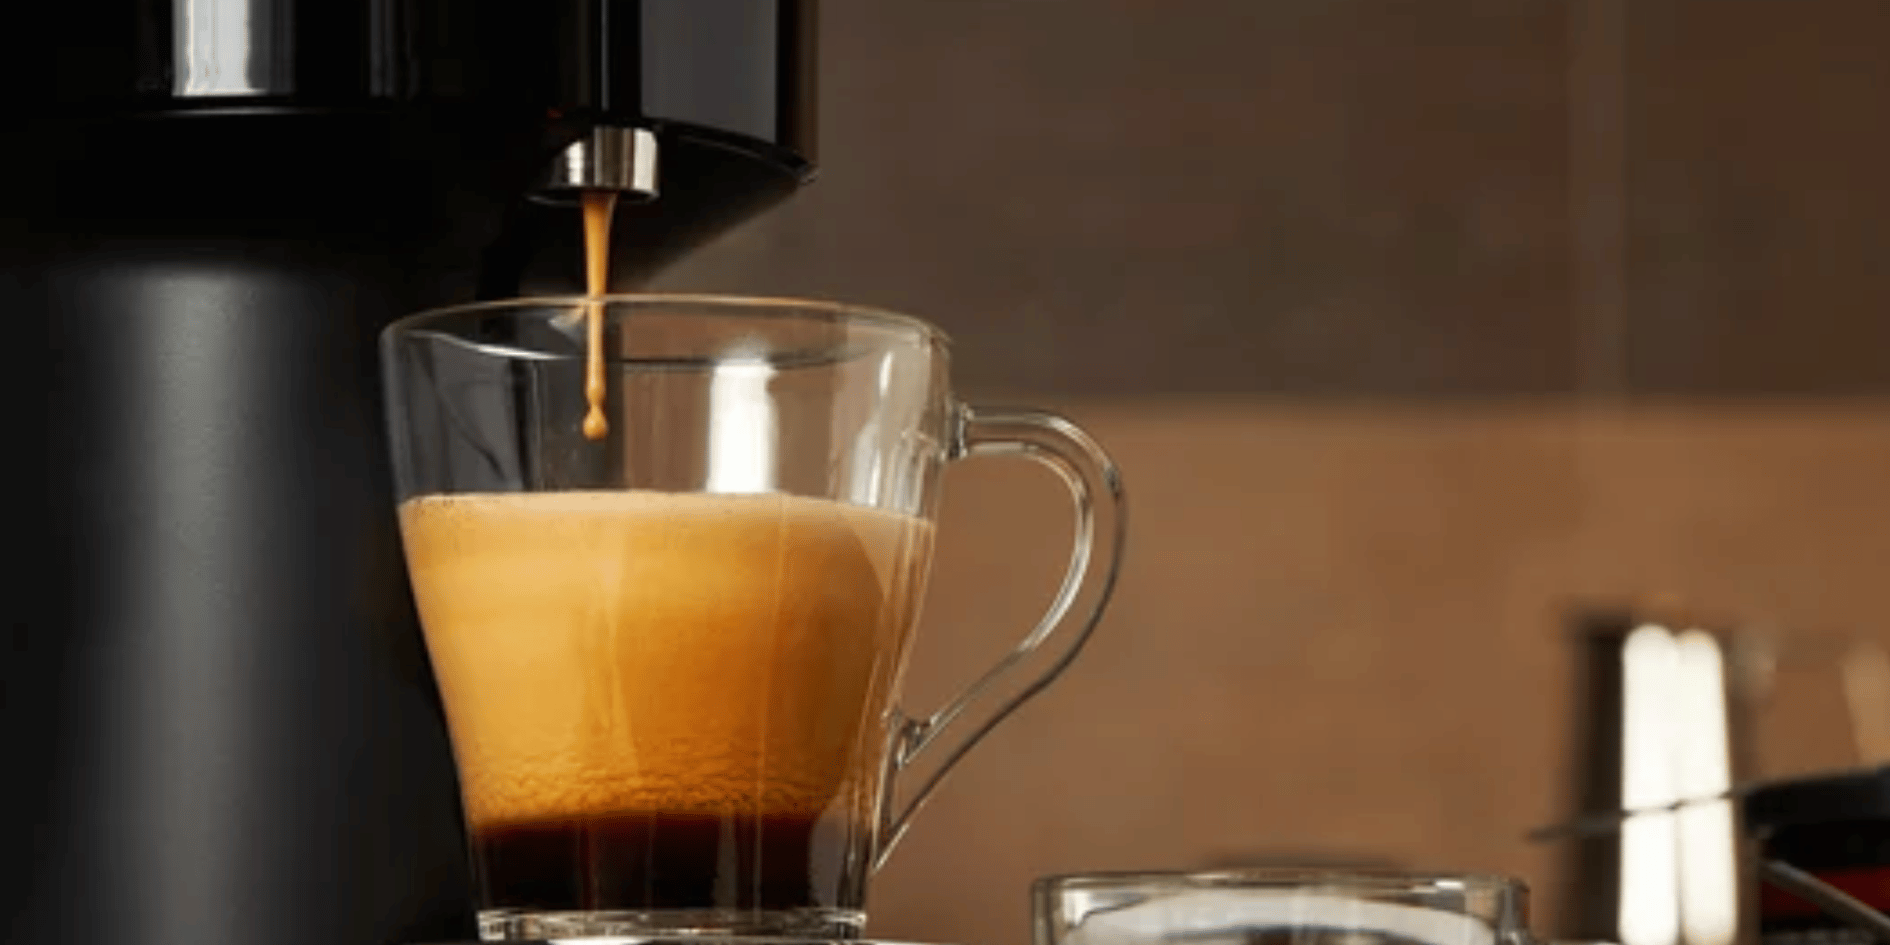 5 Tips to make the perfect Espresso or Cappuccino from refillable pods